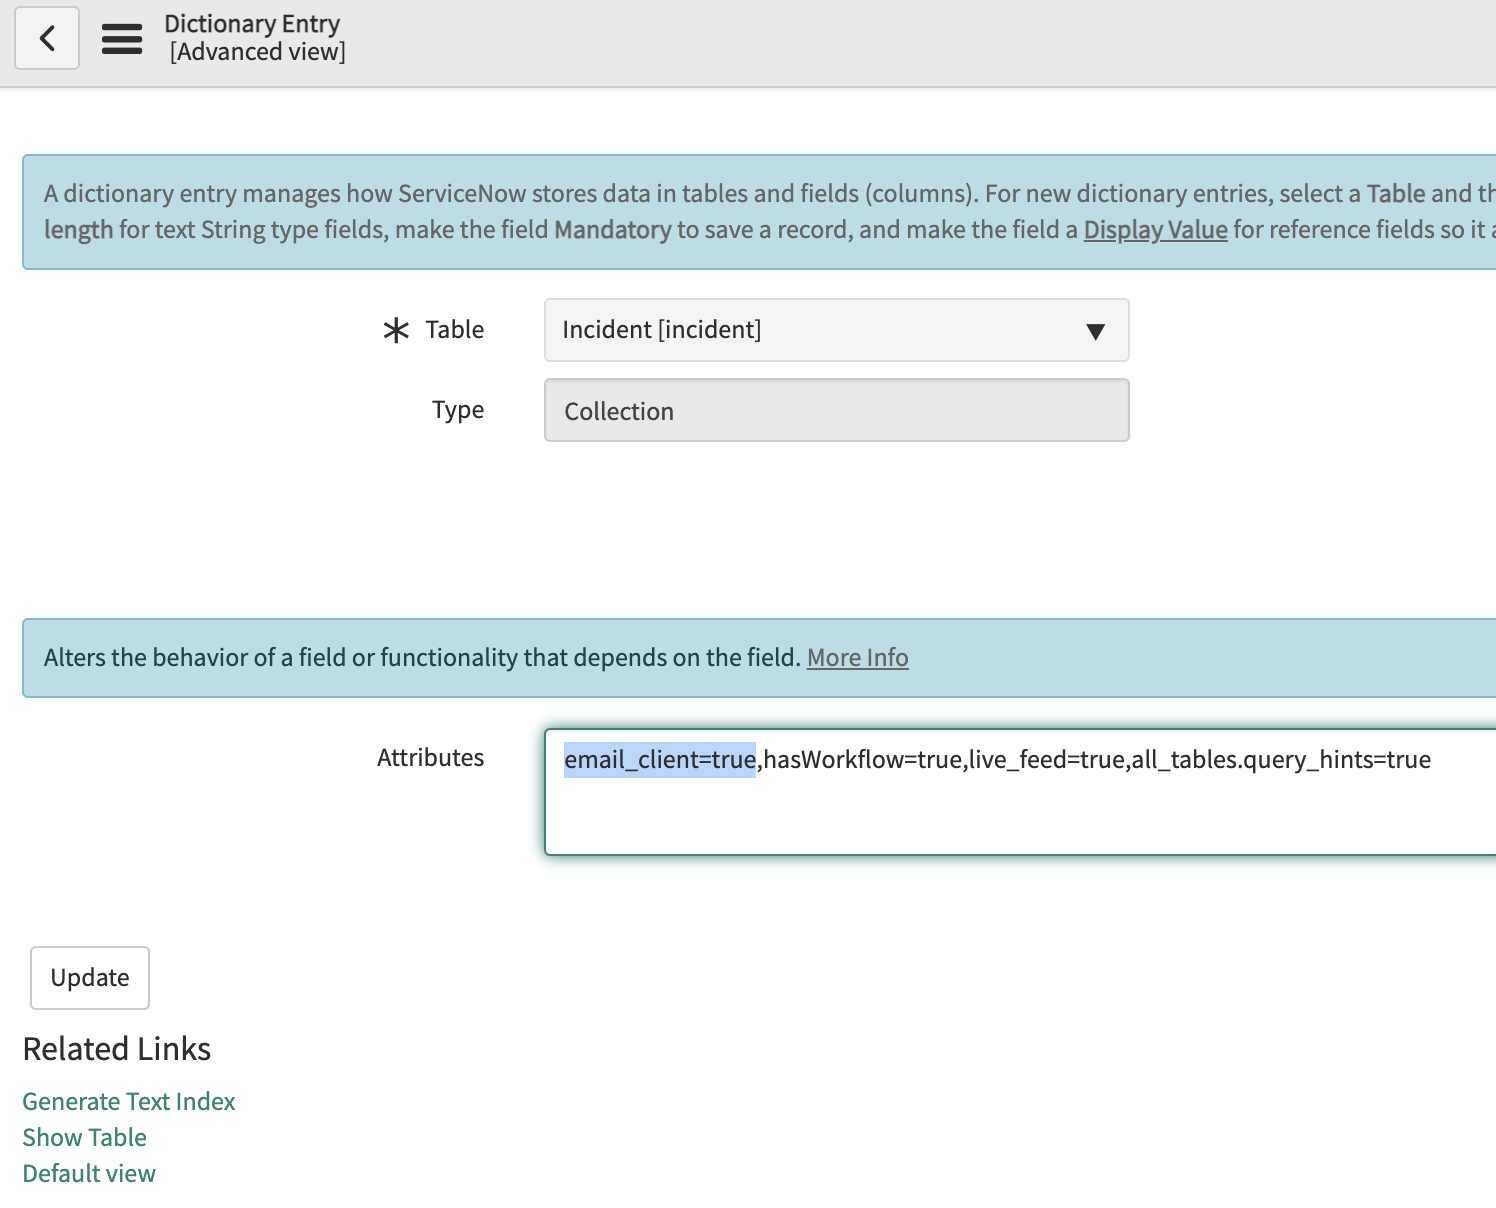 add-the-email-client-to-any-application-in-servicenow-the-snowball